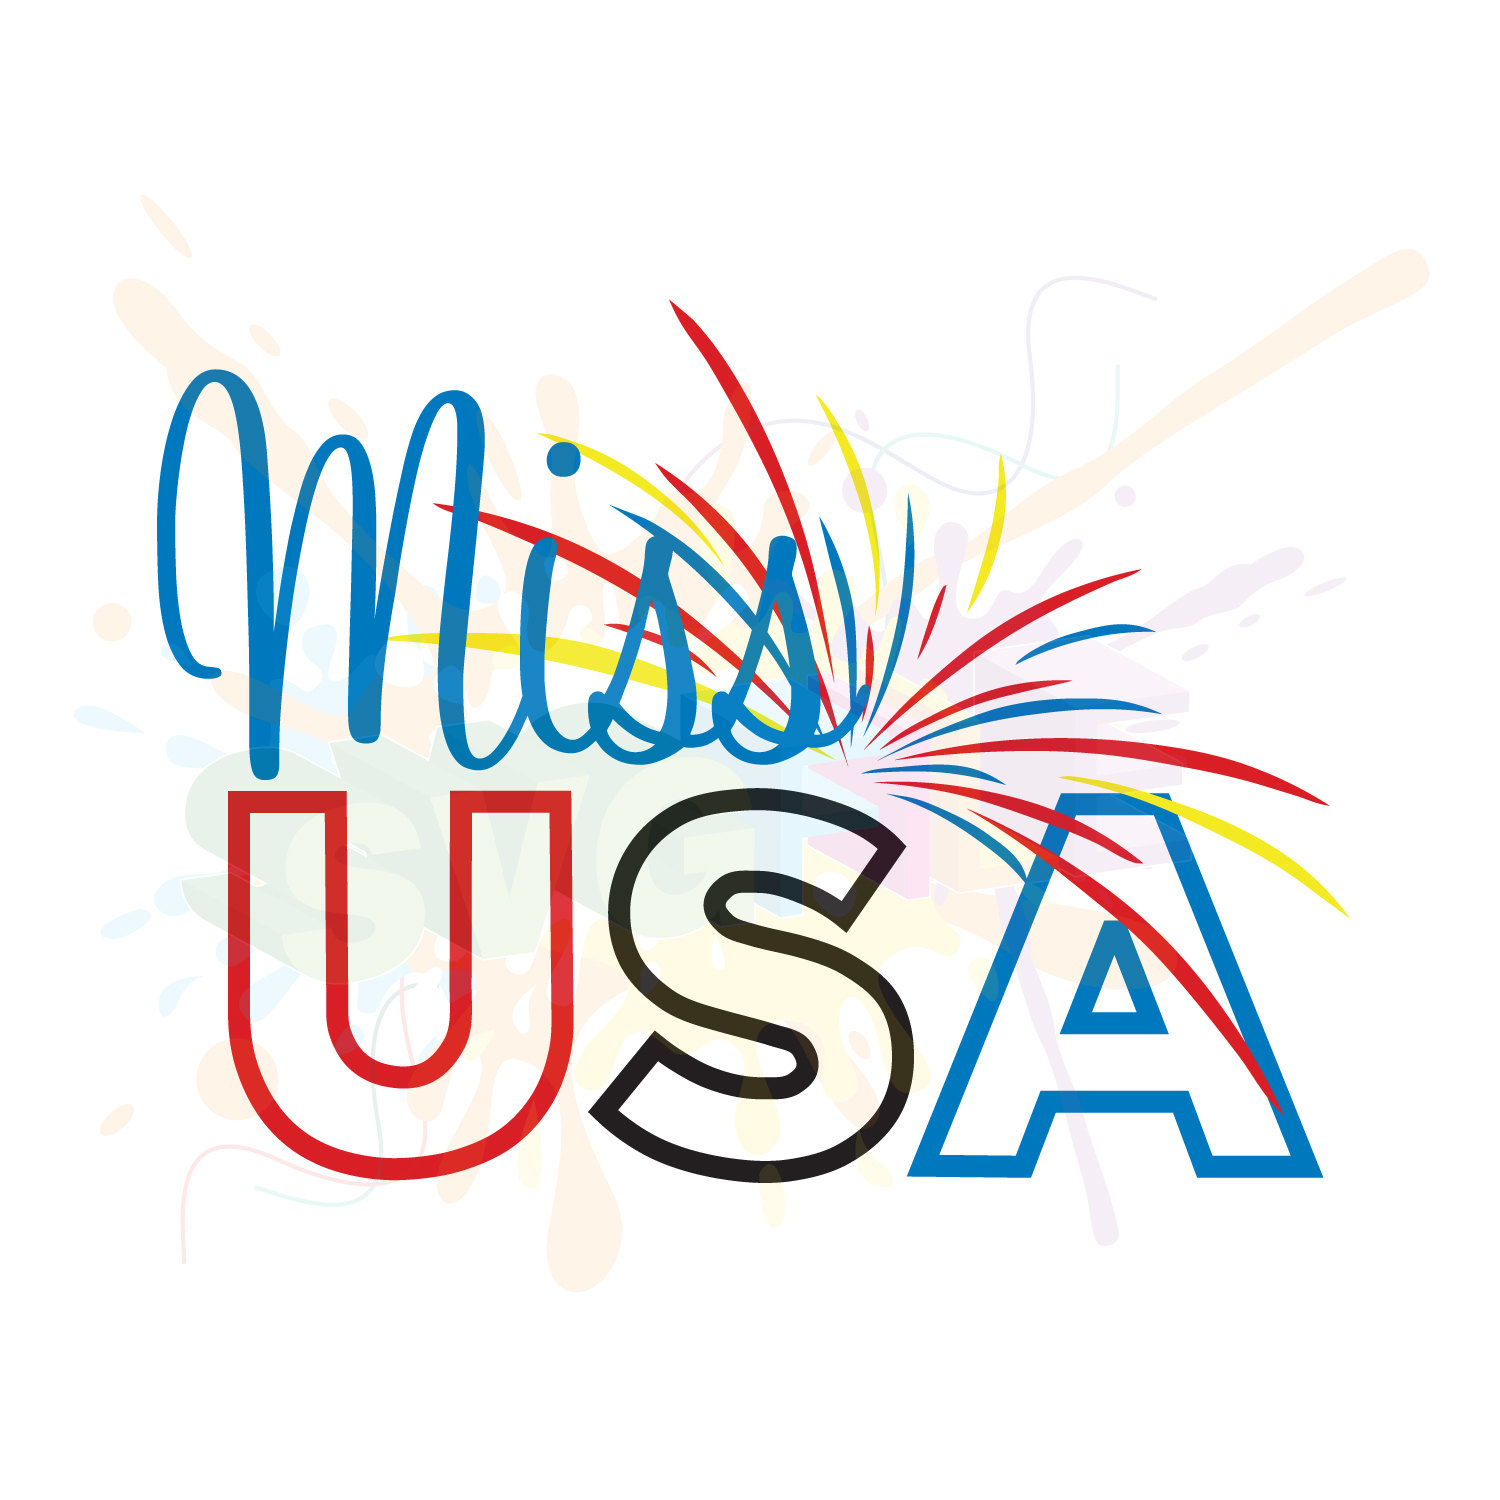 July 4th SVG Files for Cutting of USA Cricut Designs SVG